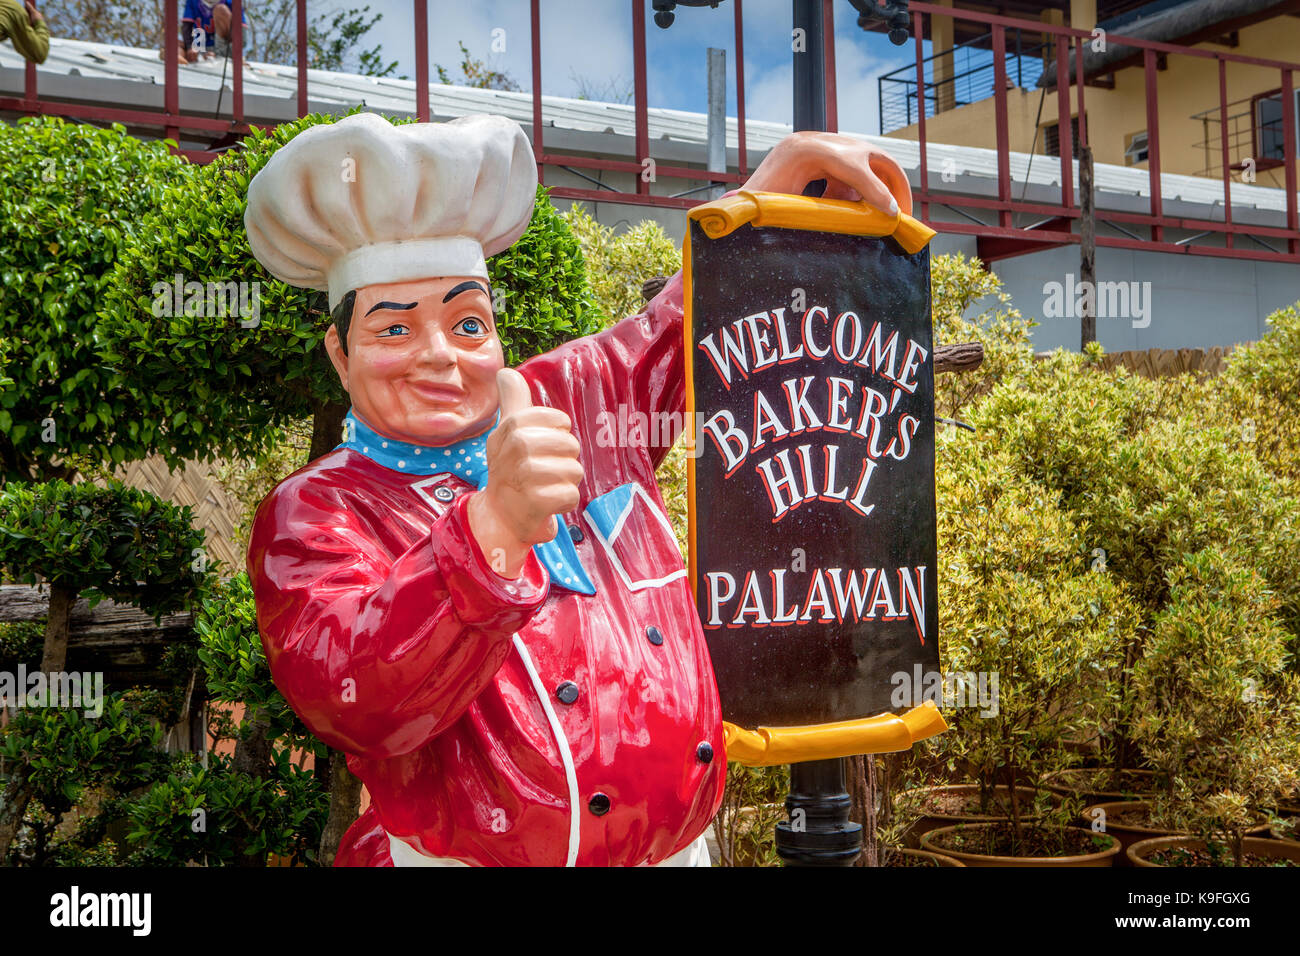 A life-size plastic pastry chef holds a sign welcoming visitors to Baker's Hill Tourist Attraction in Puerto Princesa, Palawan Island, Philippines. Stock Photo